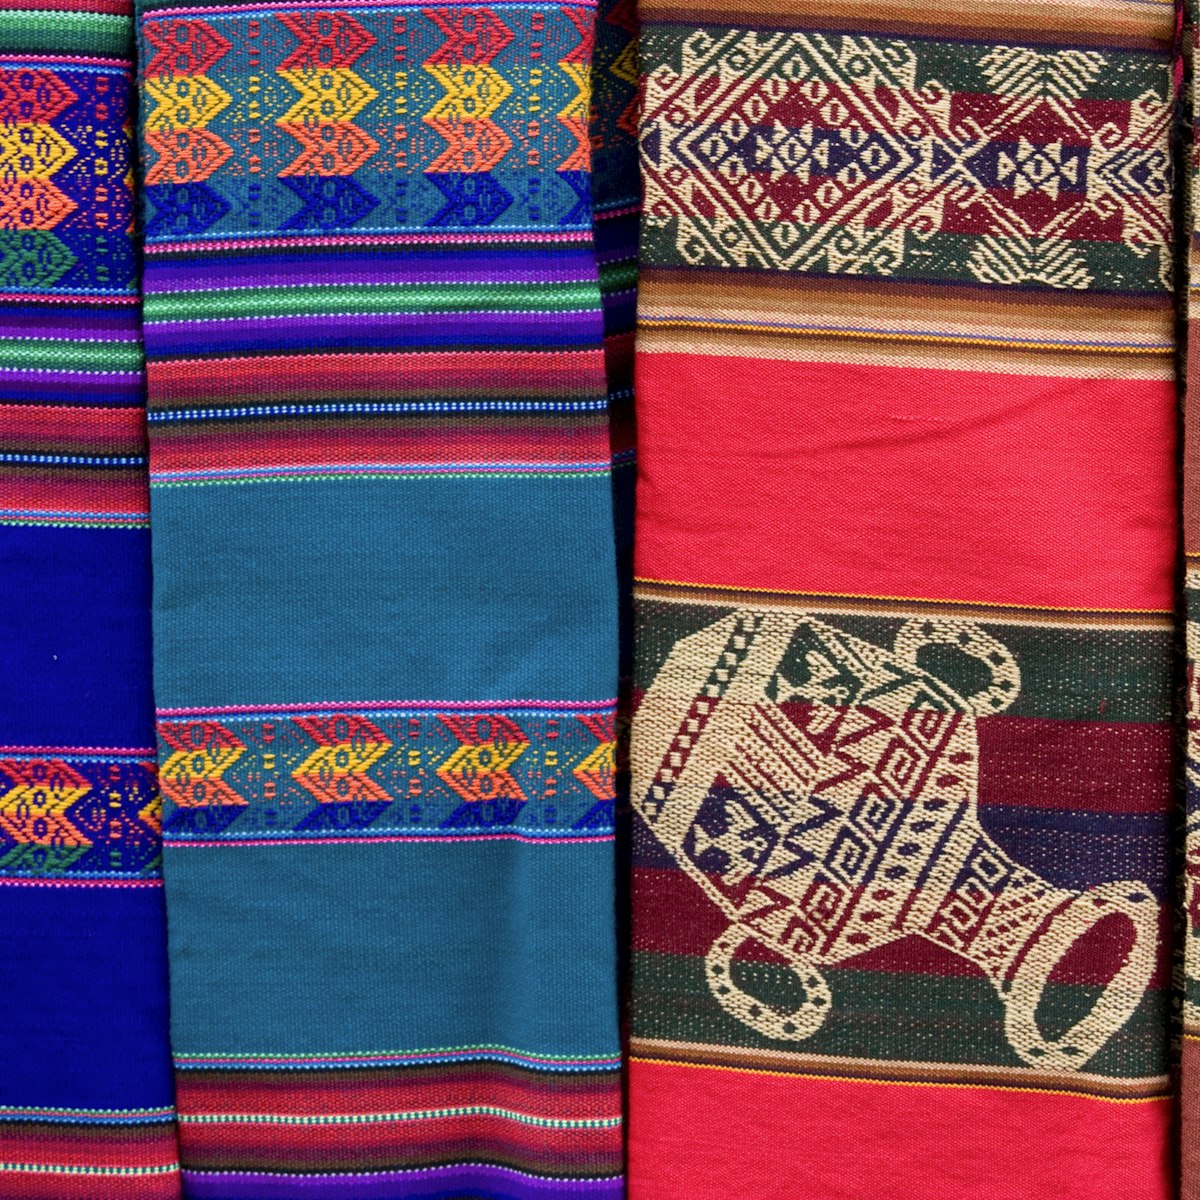 An Aguayo is a rectangular piece of cloth used in traditional communities in the Andes of Ecuador, Peru, Bolivia, Chile and Argentina. The aguayo is most associated with Quechua and Aymara culture but is not exclusive to them. Aguayos typically features colorful stripes intercalated with rhombuses and other figures with symbolic values.